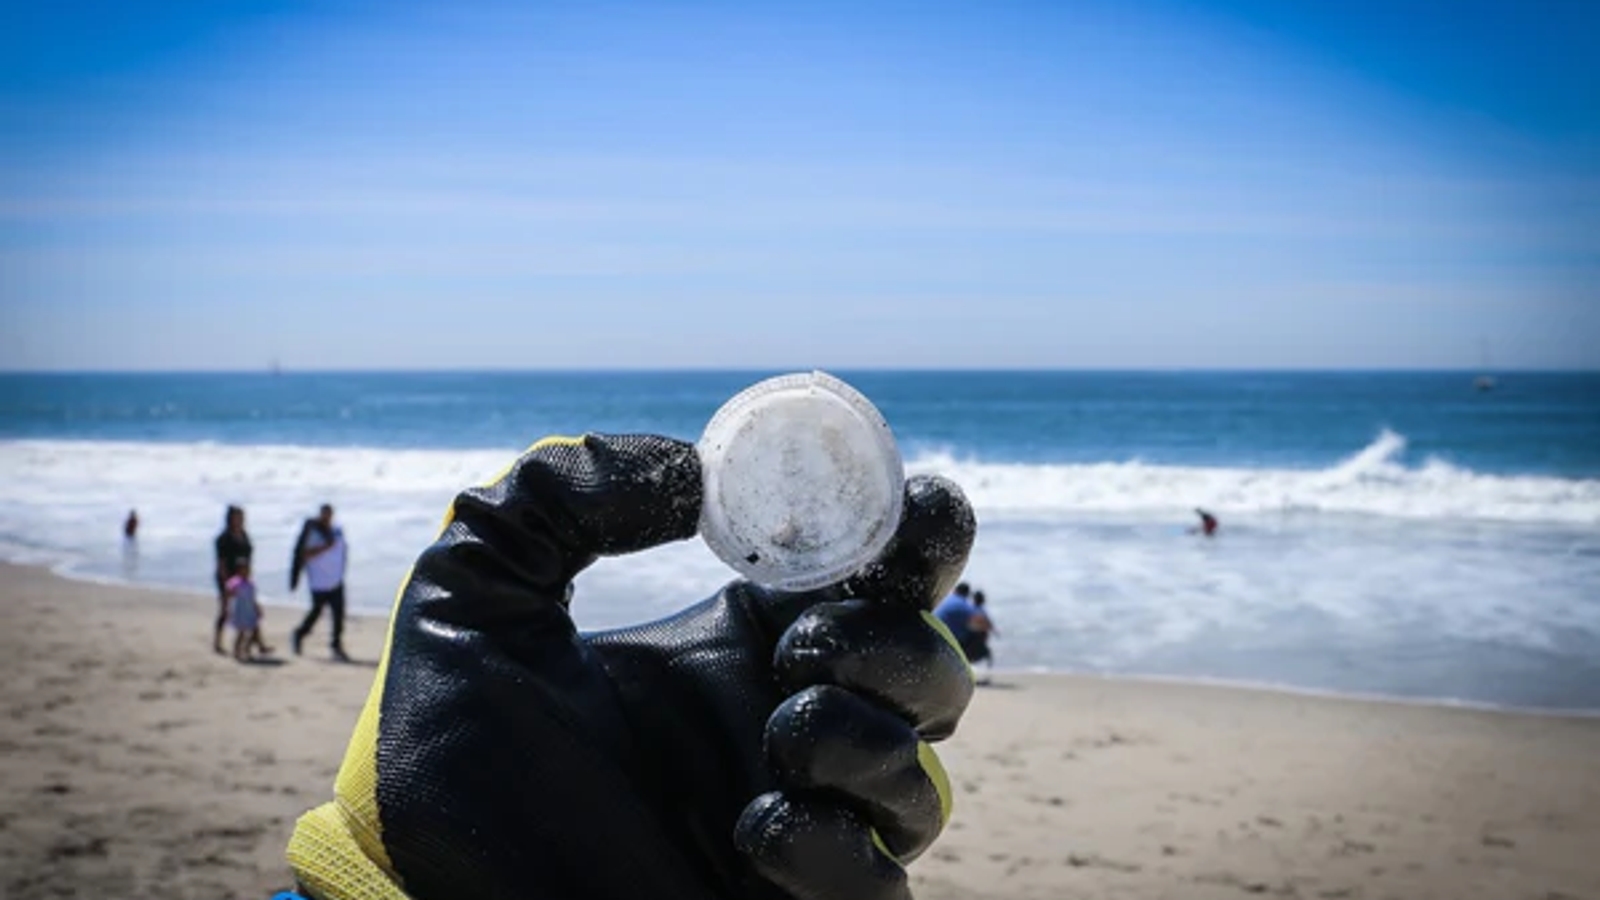 someone's gloved hand holding up a plastic bottle cap on a beach